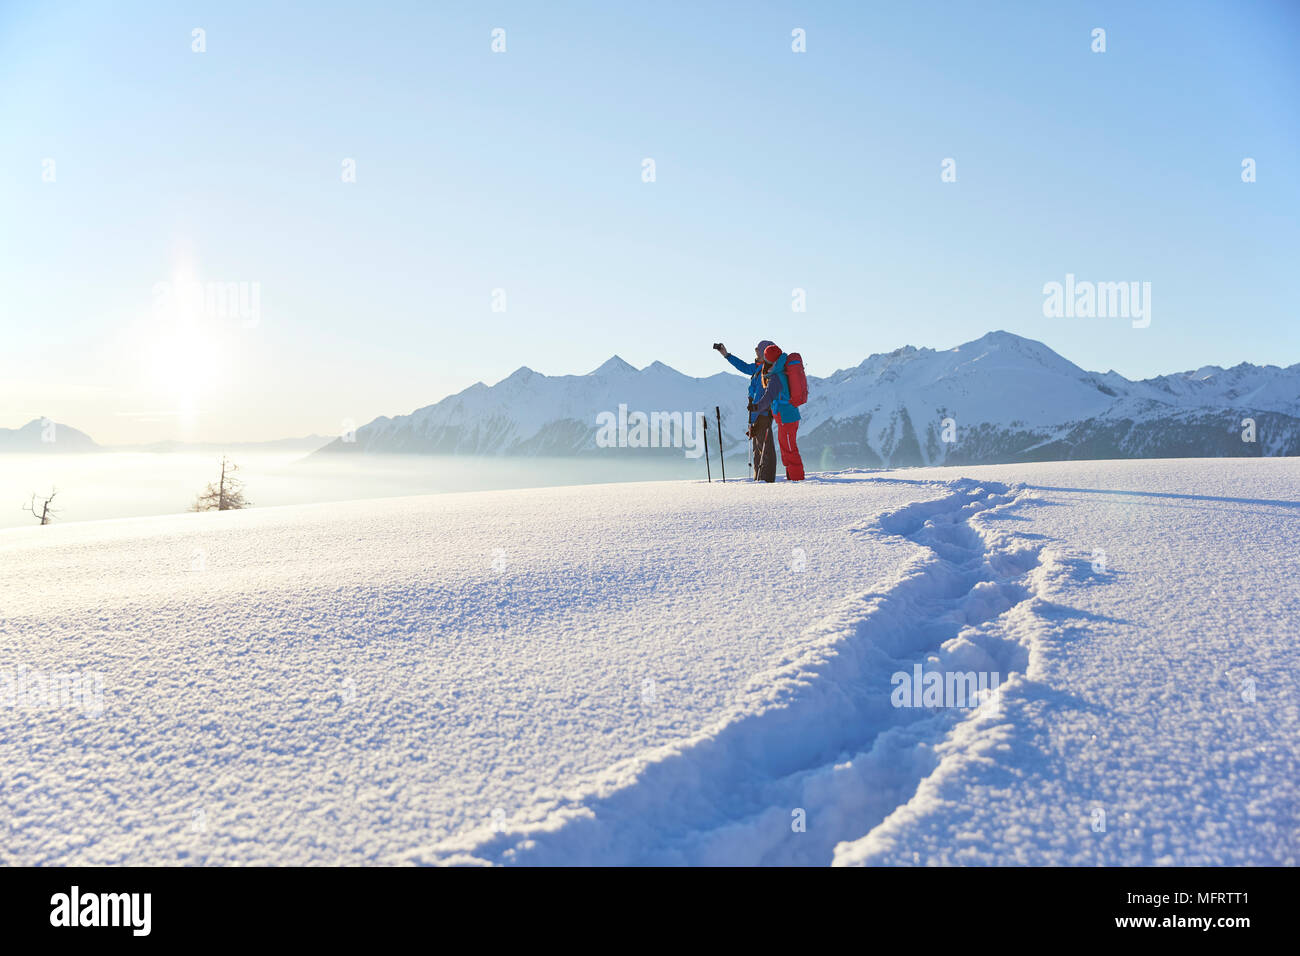 Snowshoeing, hiking in winter landscape, Simmering Alm, Obsteig, Mieming, Tyrol, Austria Stock Photo